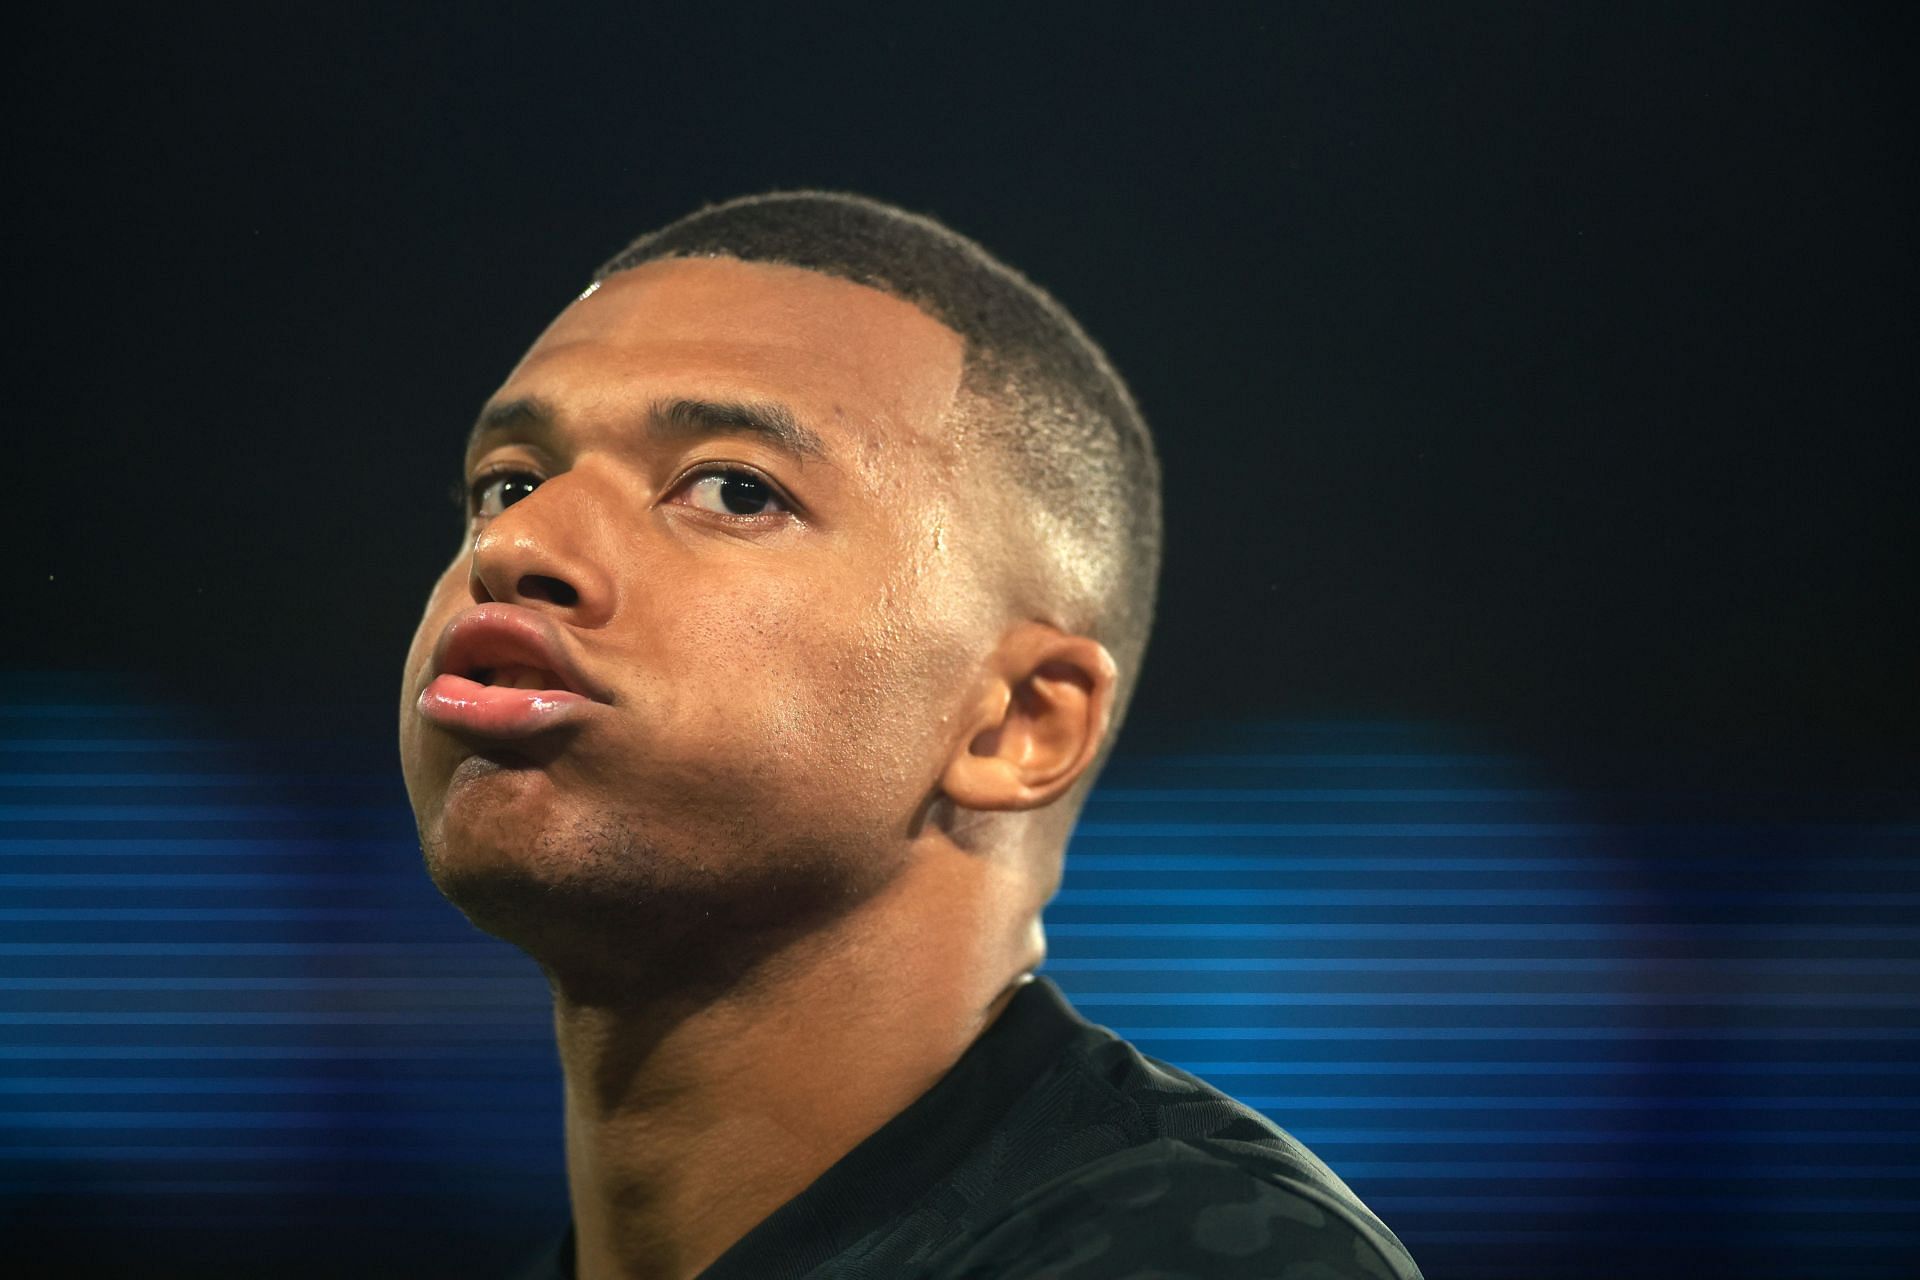 Kylian Mbappe is likely to arrive at the Santiago Bernabeu next summer.